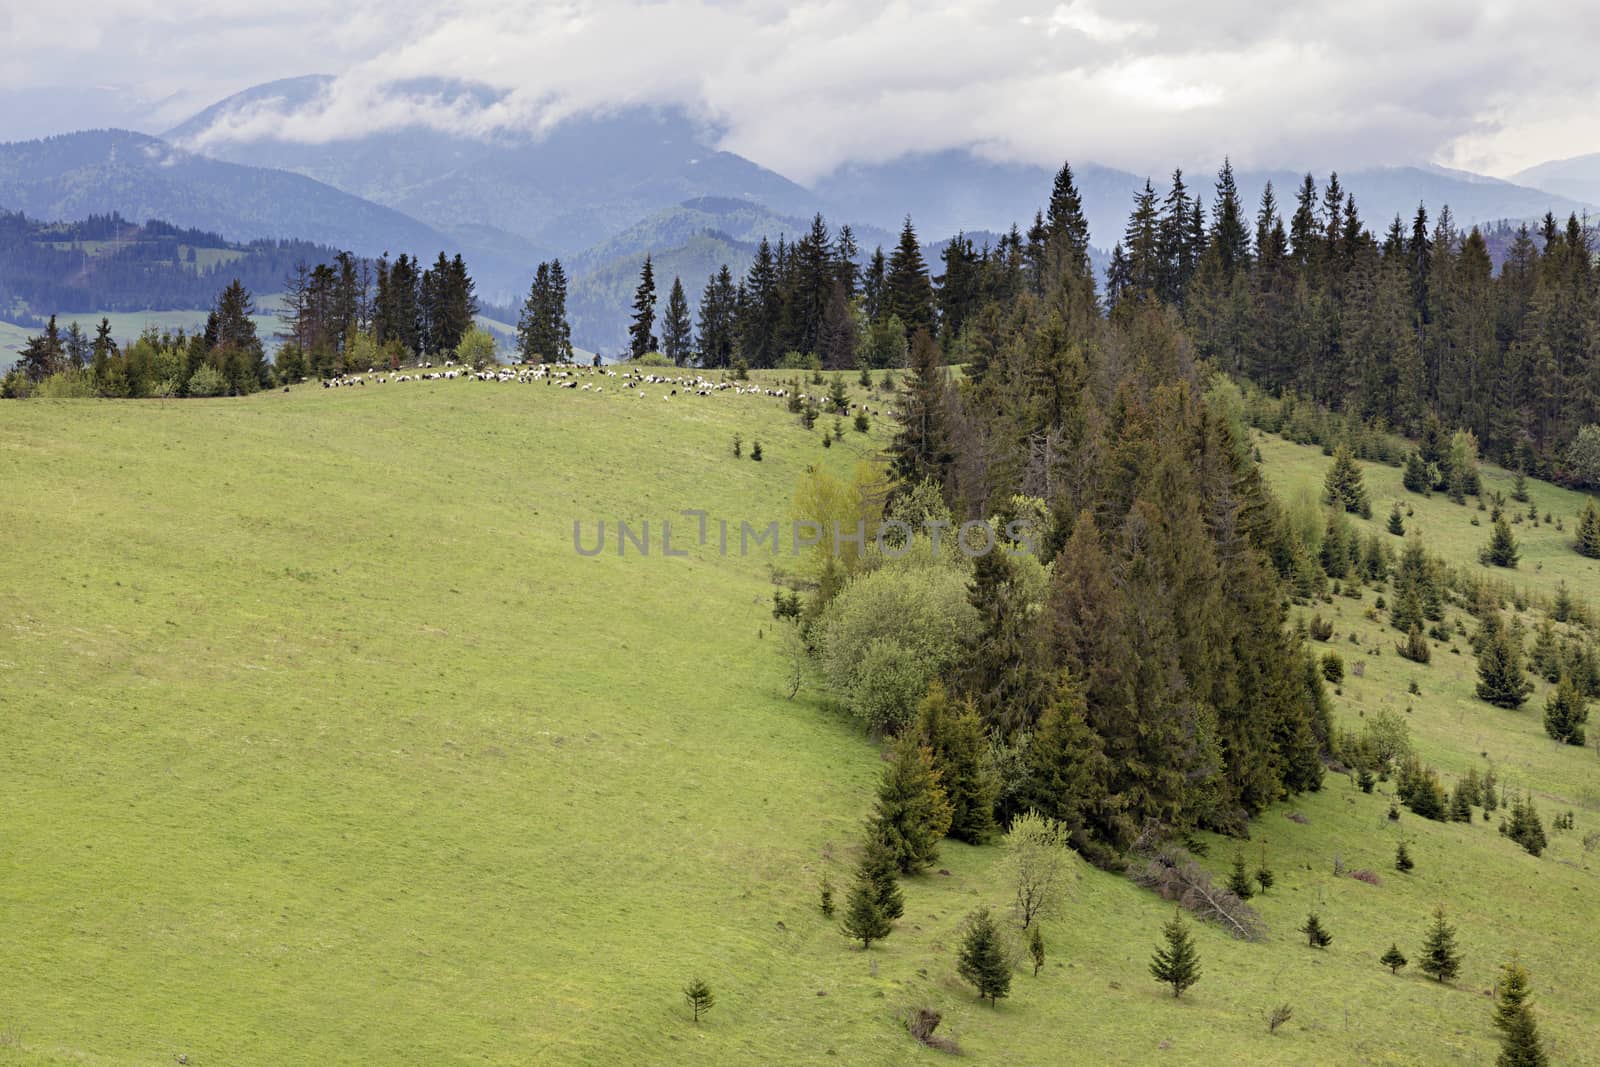 A herd of sheep grazing on the carpathian mountains by Sergii